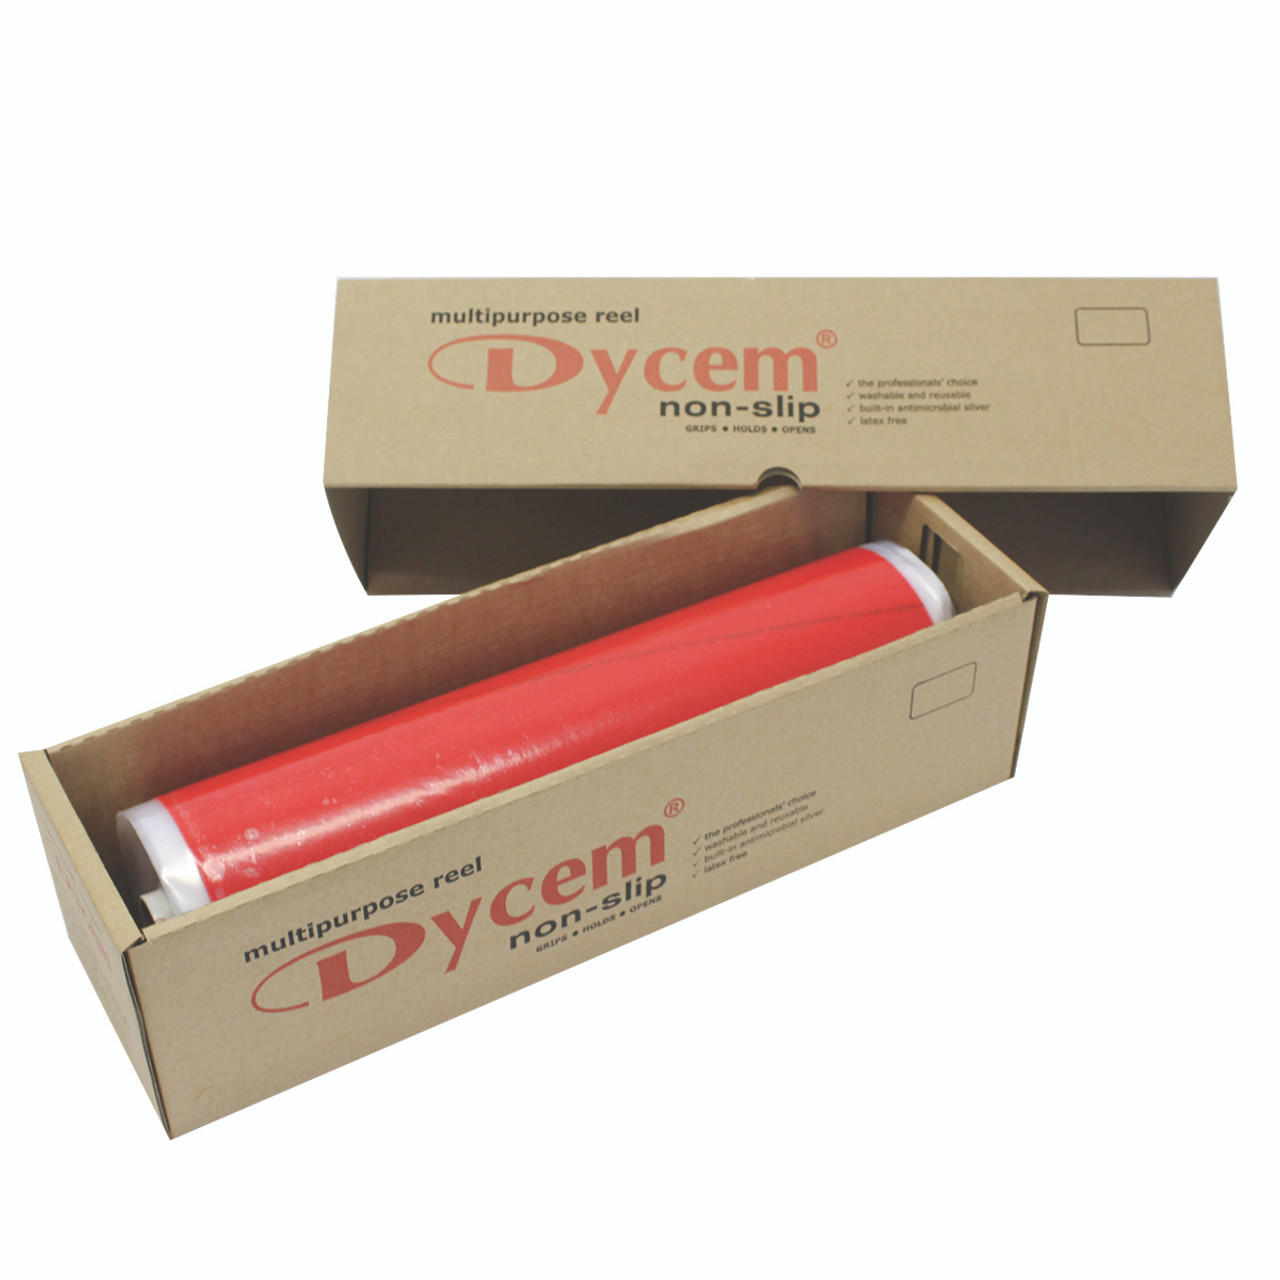 Dycem¨ non-slip material, roll, 16"x16 yard, red